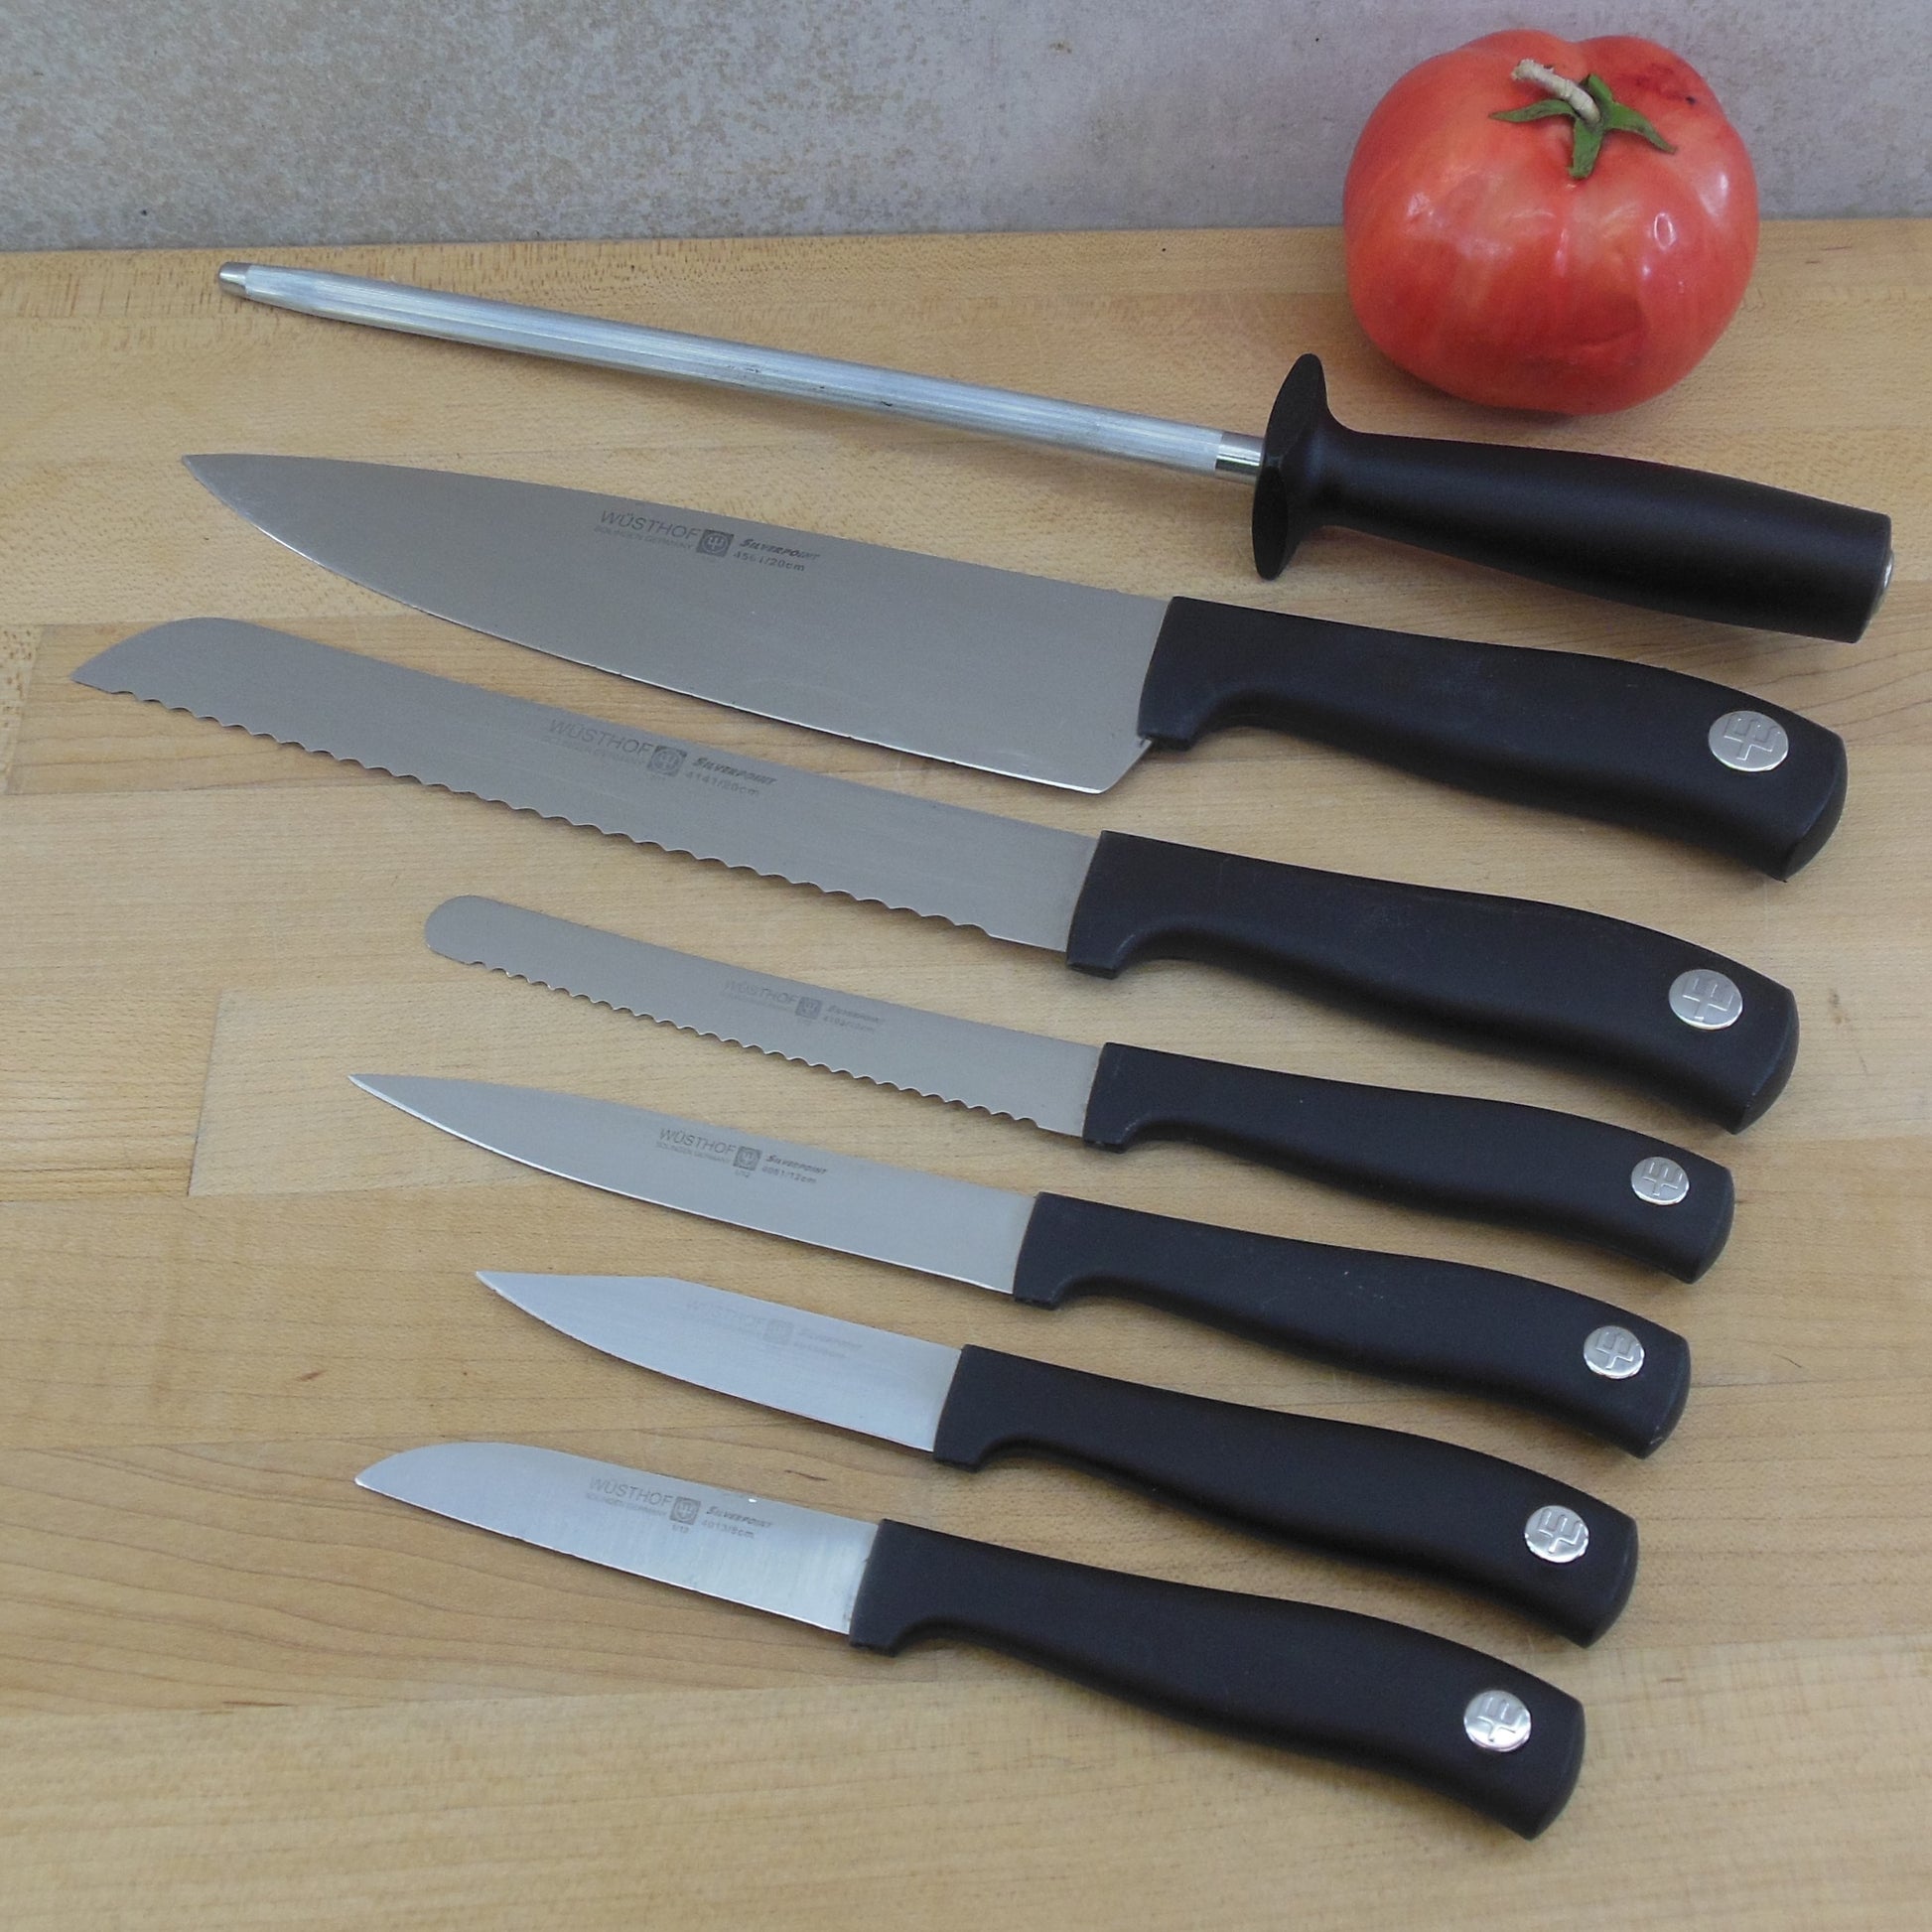 Wusthof Solingen Germany Silverpoint 7 Piece Stainless Knife Set